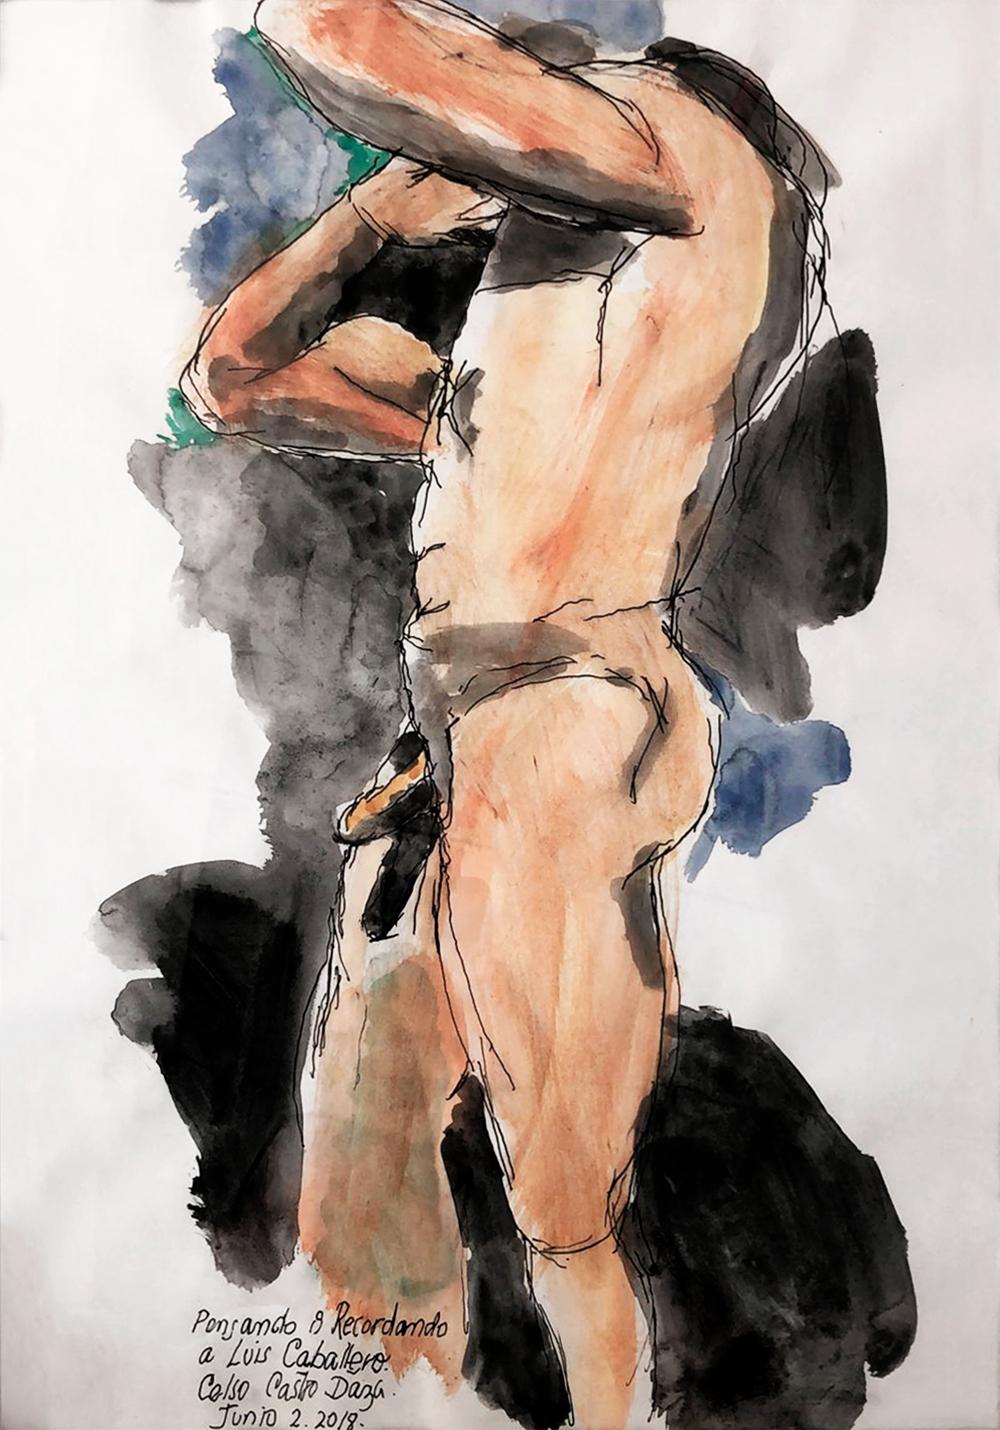 From the Duchándome Nude, Series. Set of 12 Watercolors & Ink on archival paper For Sale 4